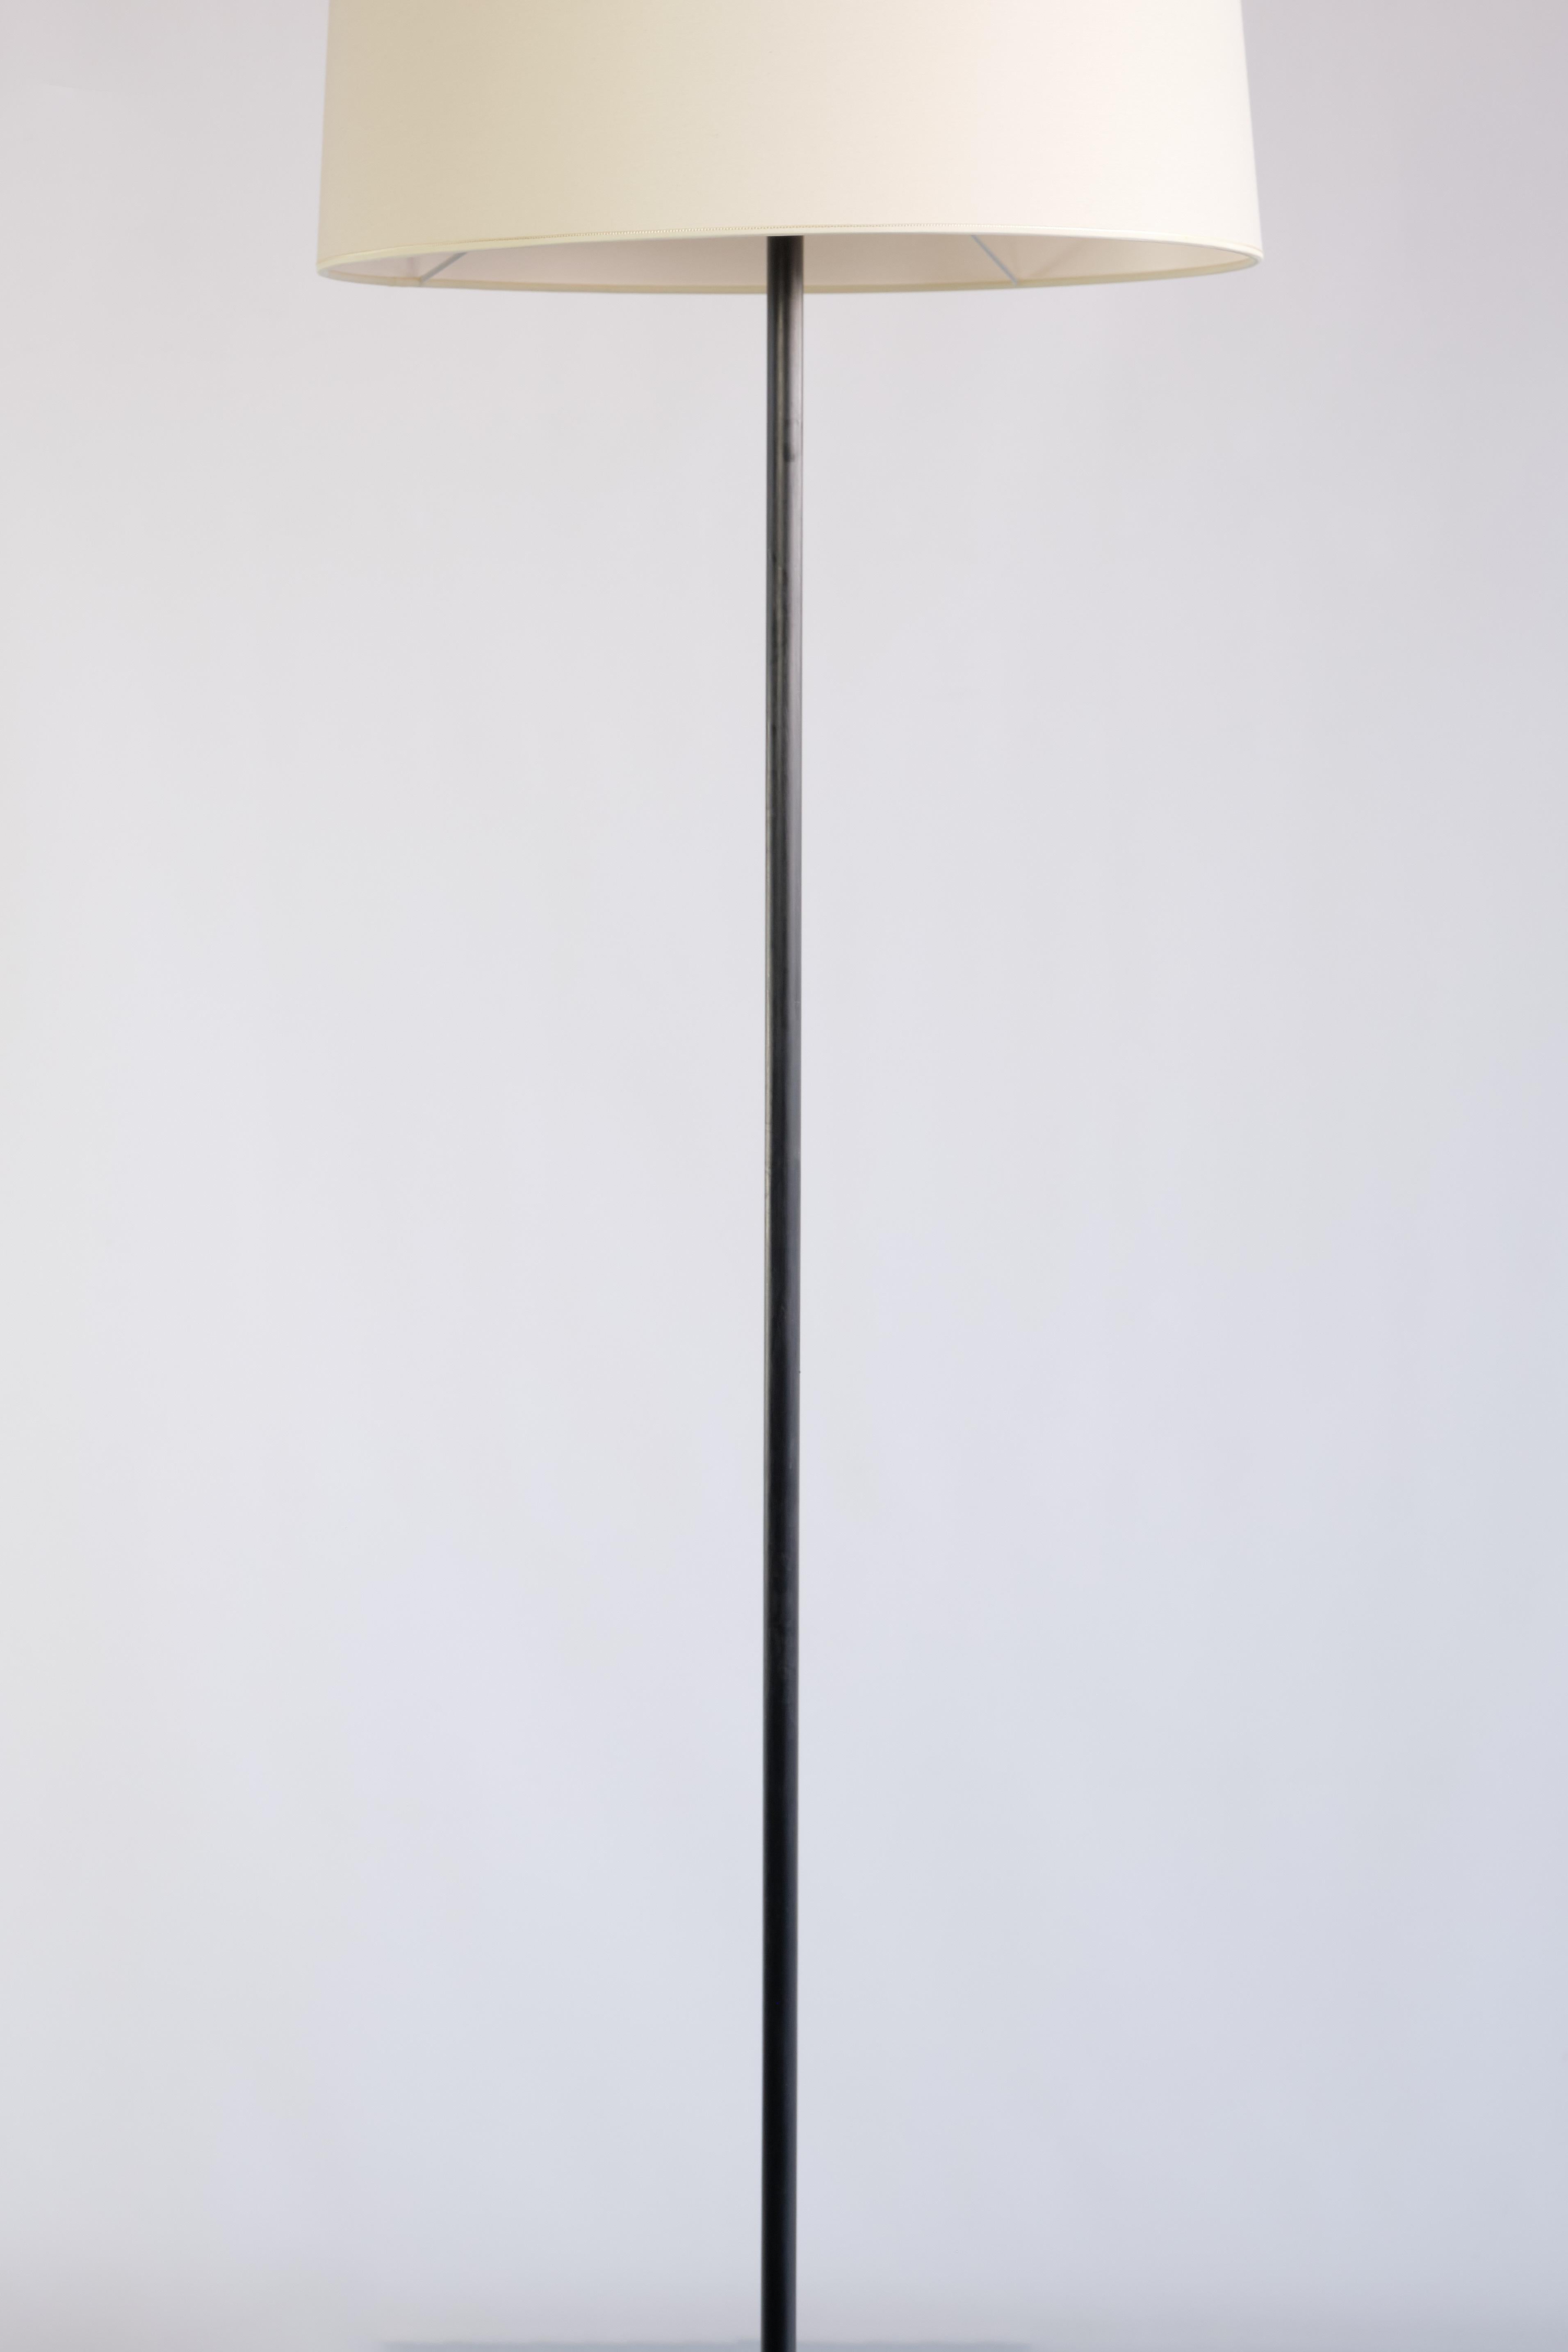 French Modern Three Legged Floor Lamp, Black Iron and Ivory Shade, 1950s In Good Condition For Sale In The Hague, NL